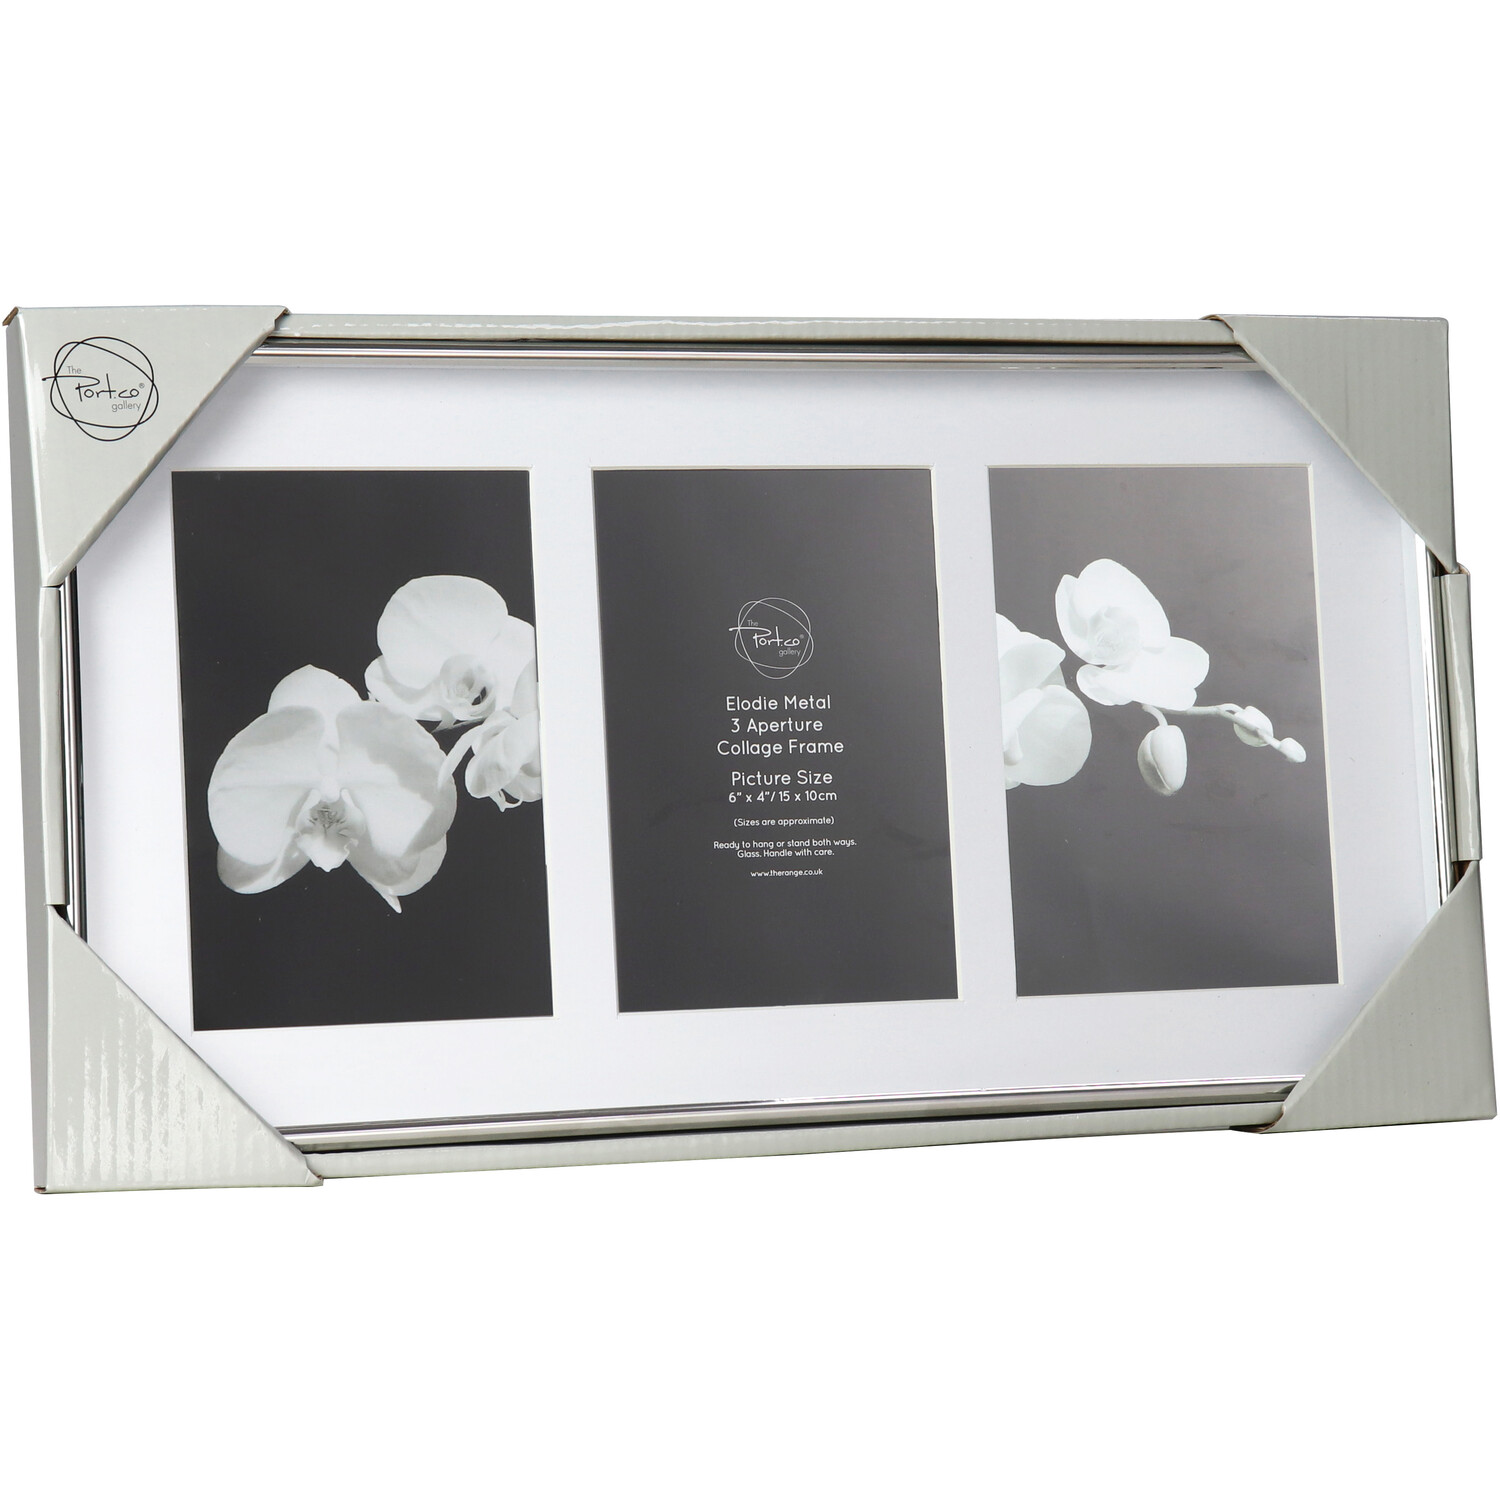 The Port. Co Gallery Elodie Silver Metal 3 Aperture Collage Photo Frame 6 x 4 inch Image 1